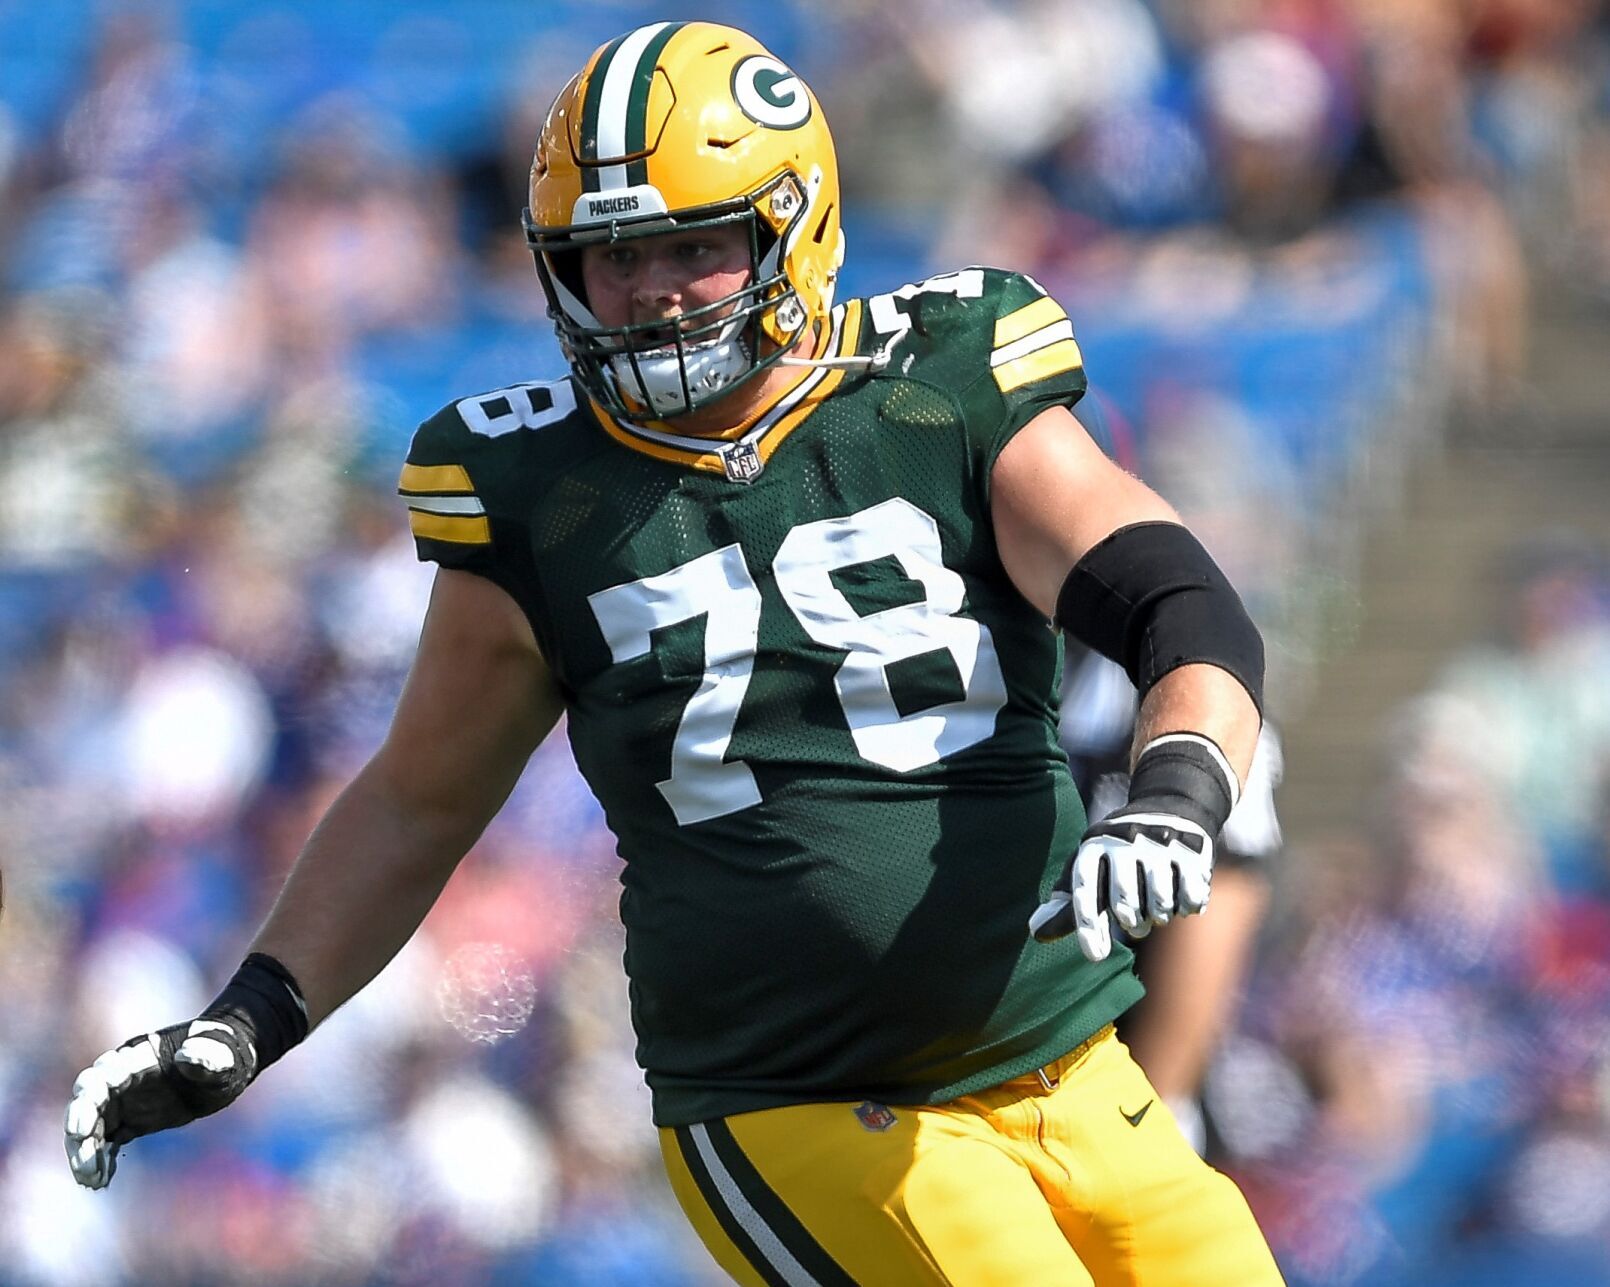 For former Badgers lineman Cole Van Lanen, success with Packers